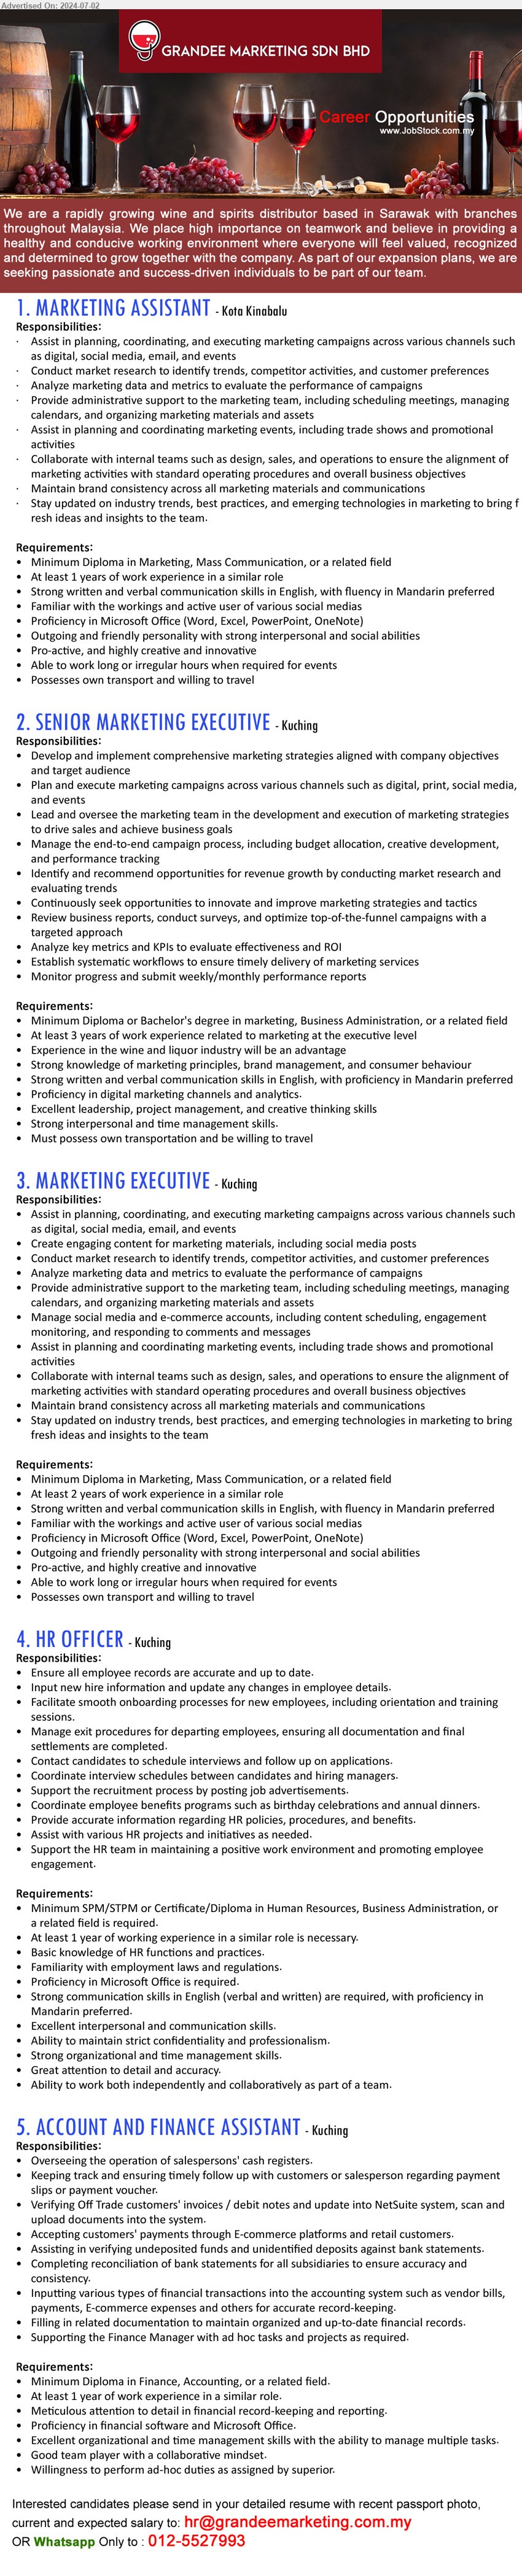 GRANDEE MARKETING SDN BHD - 1. MARKETING ASSISTANT (Kota Kinabalu), Diploma in Marketing, Mass Communication,...
2. SENIOR MARKETING EXECUTIVE (Kuching), Diploma or Bachelor's Degree in Marketing, Business Administration,...
3. MARKETING EXECUTIVE (Kuching), Diploma in Marketing, Mass Communication,...
4. HR OFFICER (Kuching), SPM/STPM or Certificate/Diploma in Human Resources, Business Administration,...
5. ACCOUNT AND FINANCE ASSISTANT (Kuching), Diploma in Finance, Accounting,,...
Whatsapp Only to : 012-5527993 / Email resume to ...